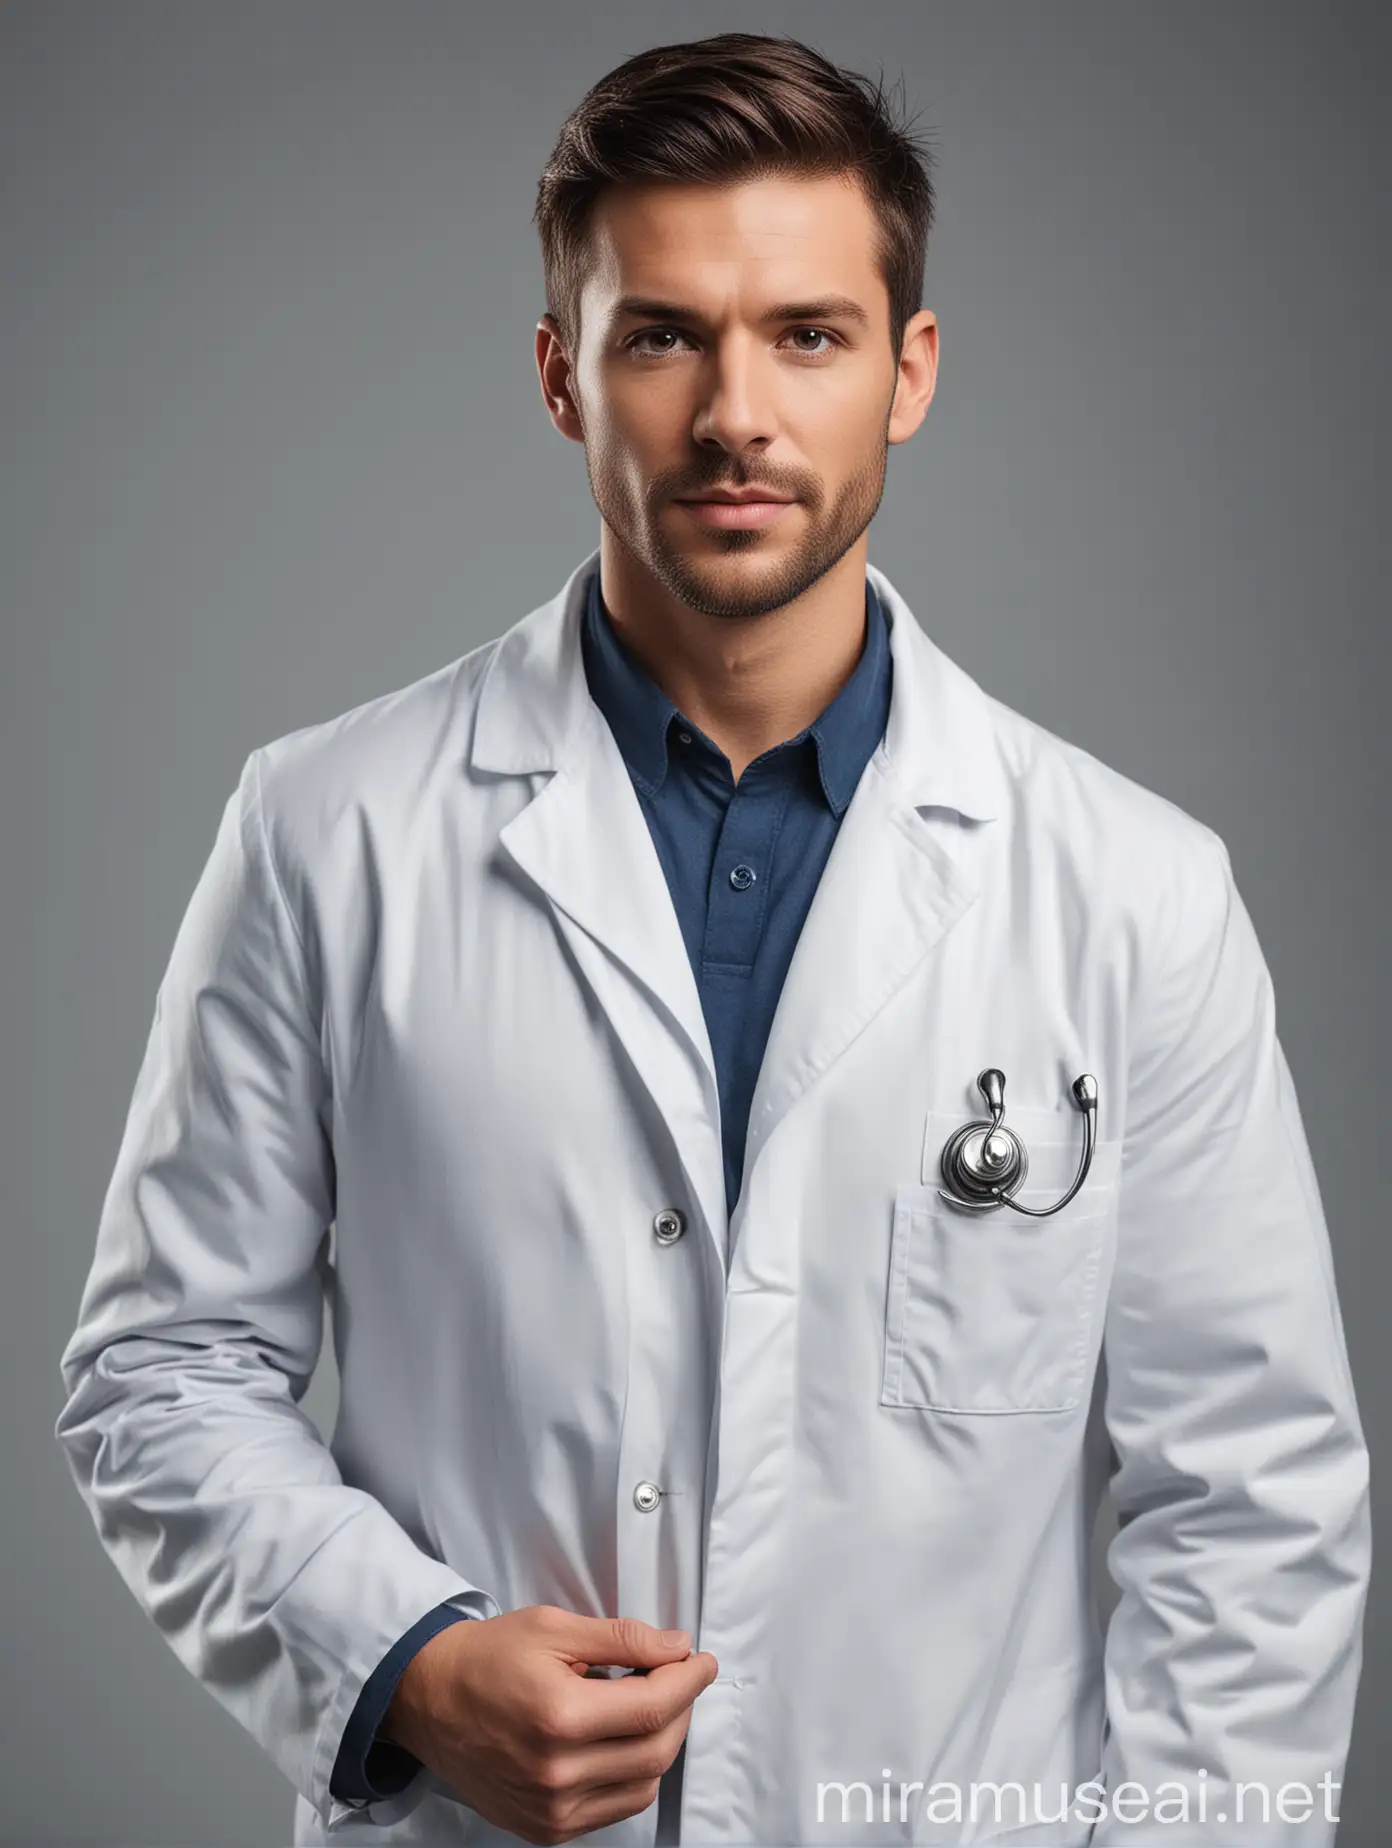 Confident Male Doctor in White Coat Examining Patient